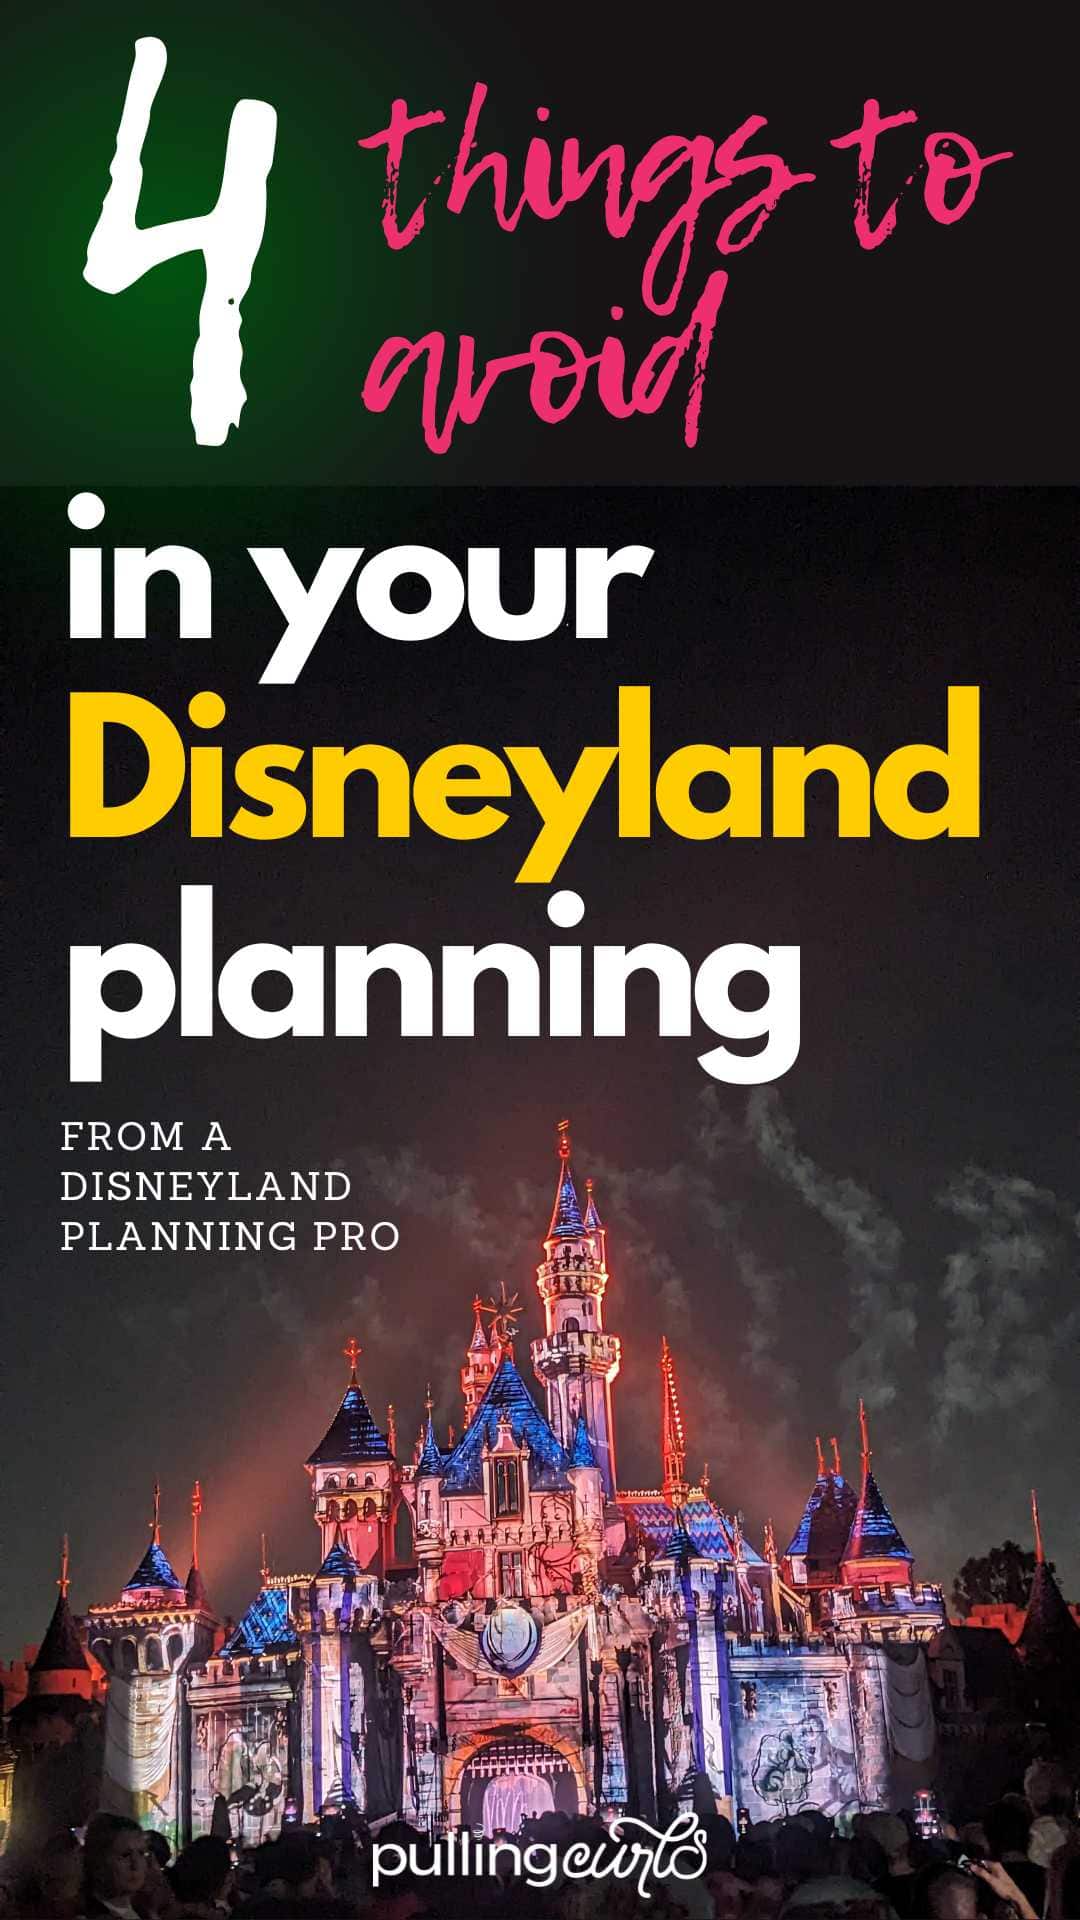 Planning a Disneyland trip? Avoid unnecessary stress and mishaps with our guide, "Steer Clear of These 4 Pitfalls for a Magical Disneyland Vacation!" We've identified common trip planning mistakes to help you maximize your Disney experience. Make memories, not mistakes! via @pullingcurls